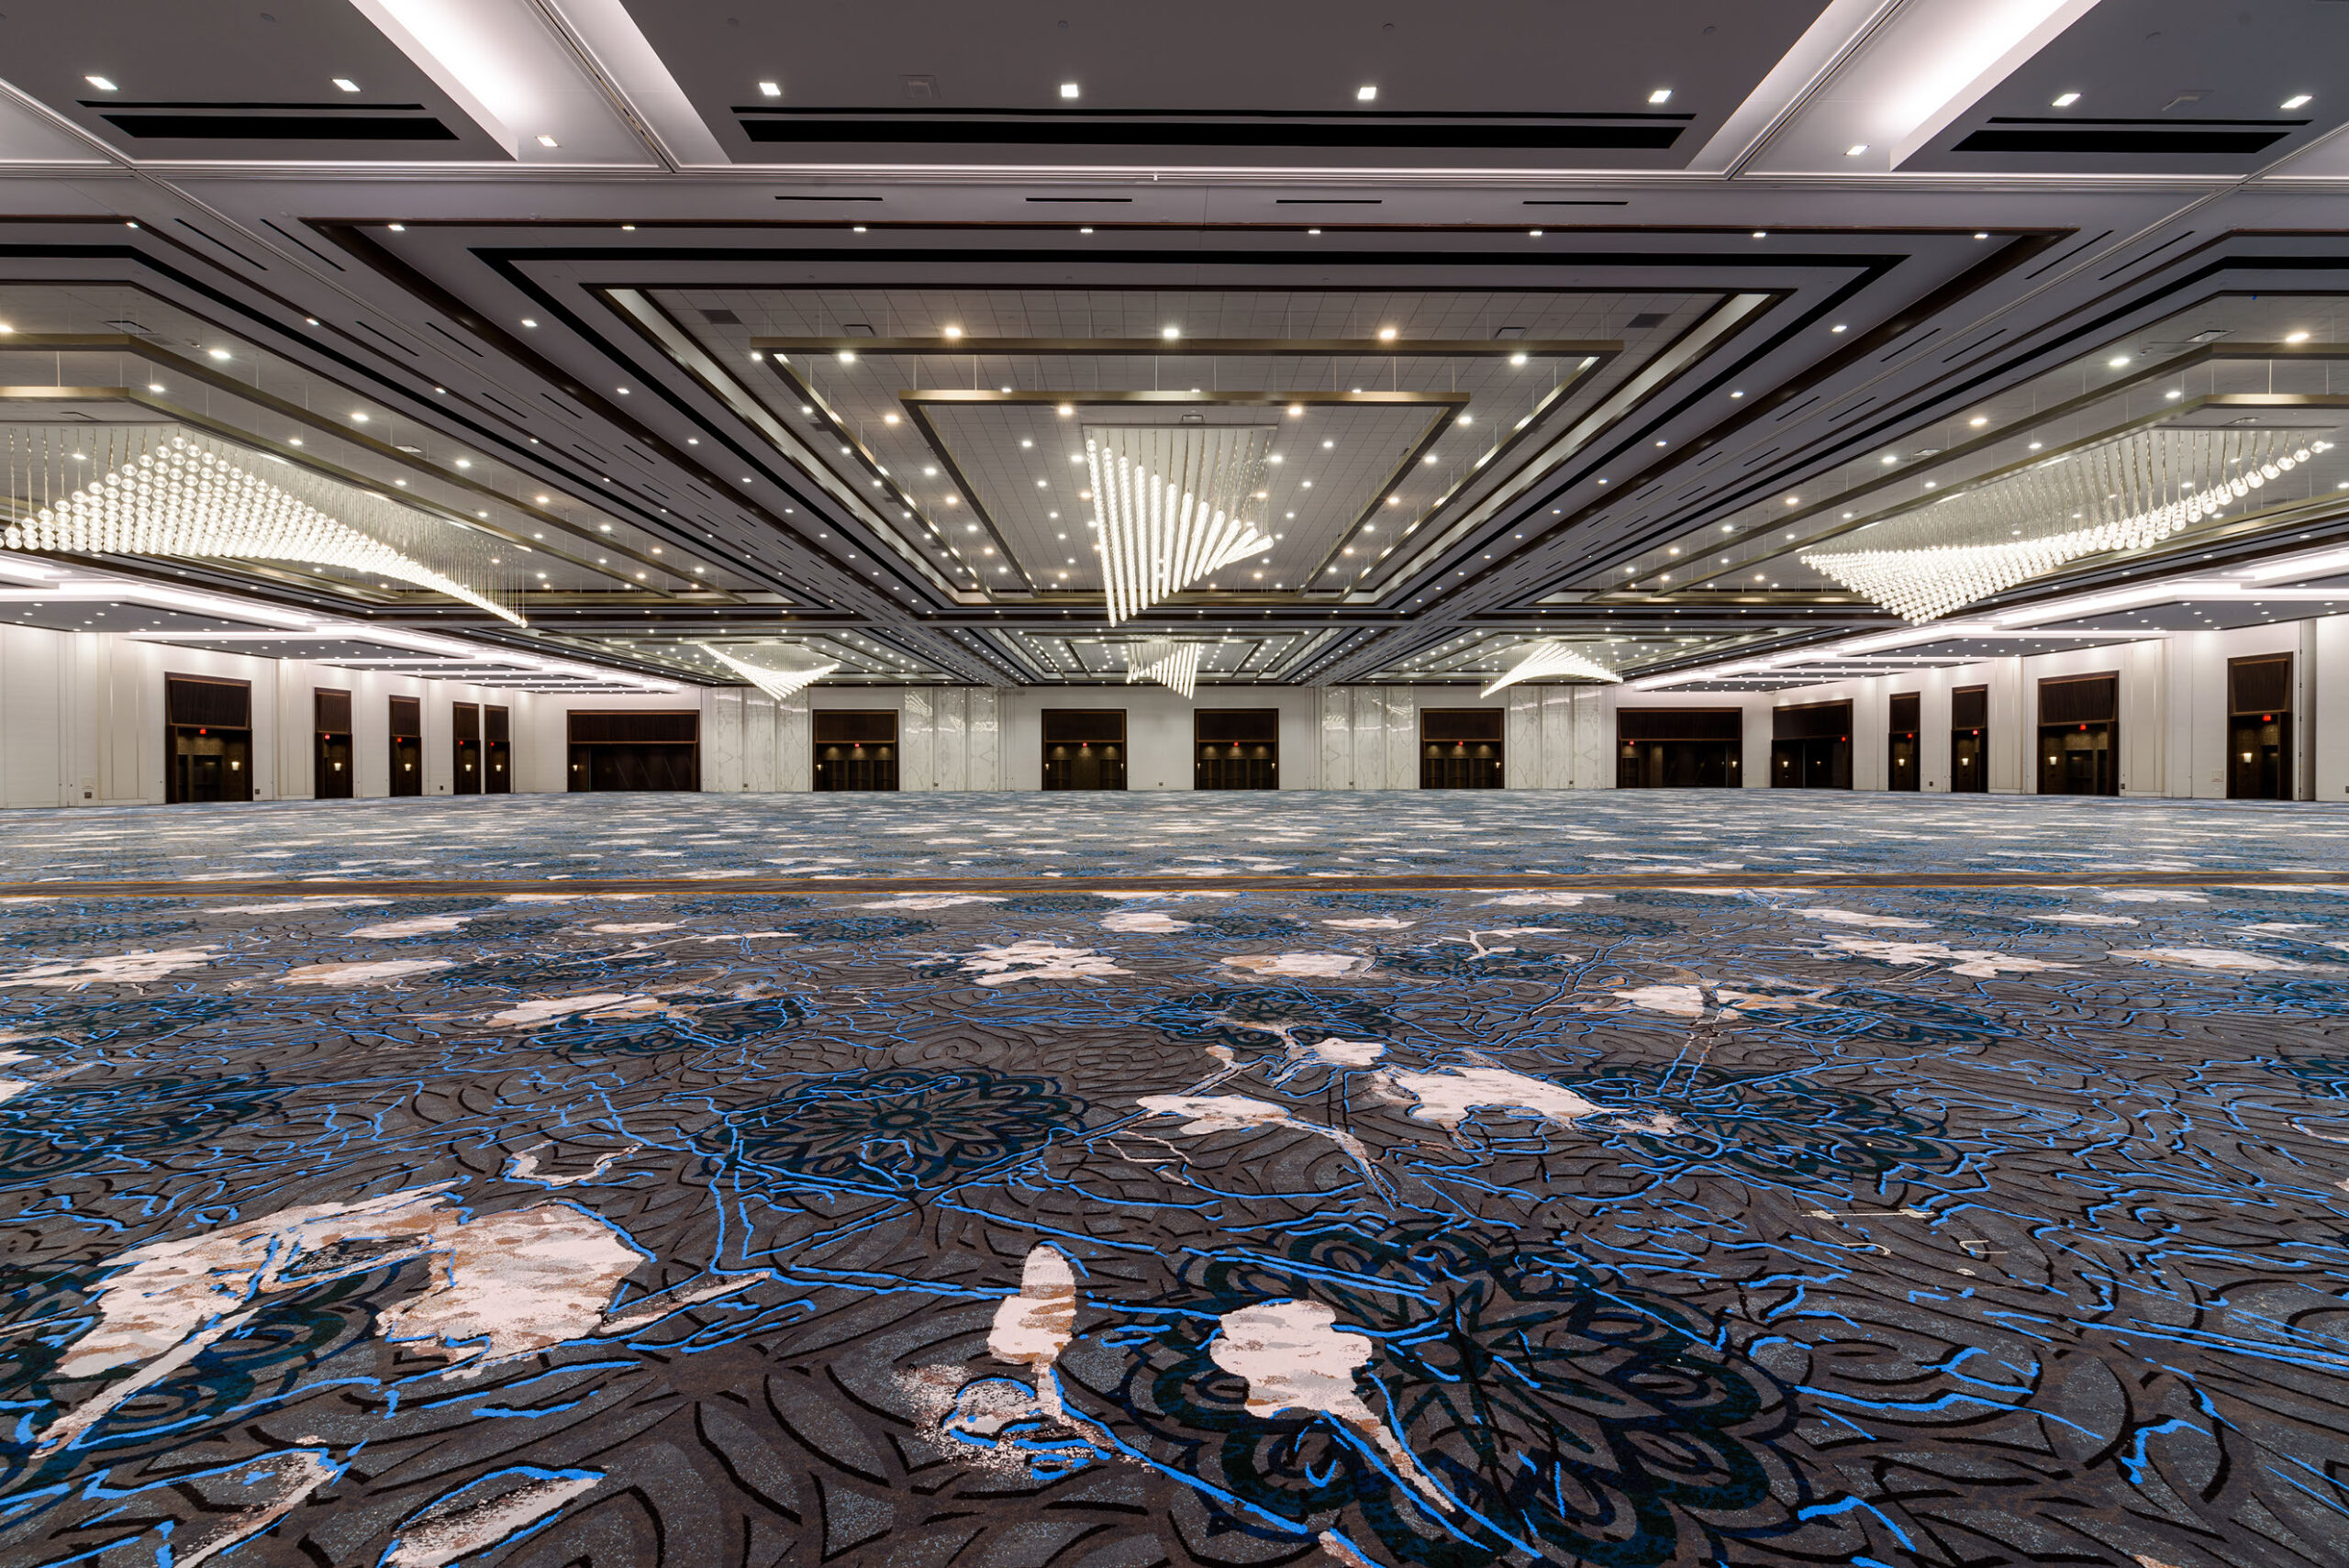 A ballroom at Caesars Forum in Las Vegas. The carpet is an abstract granite-like pattern with blue highlights. The ceiling is intricately inlaid with dotted lights.